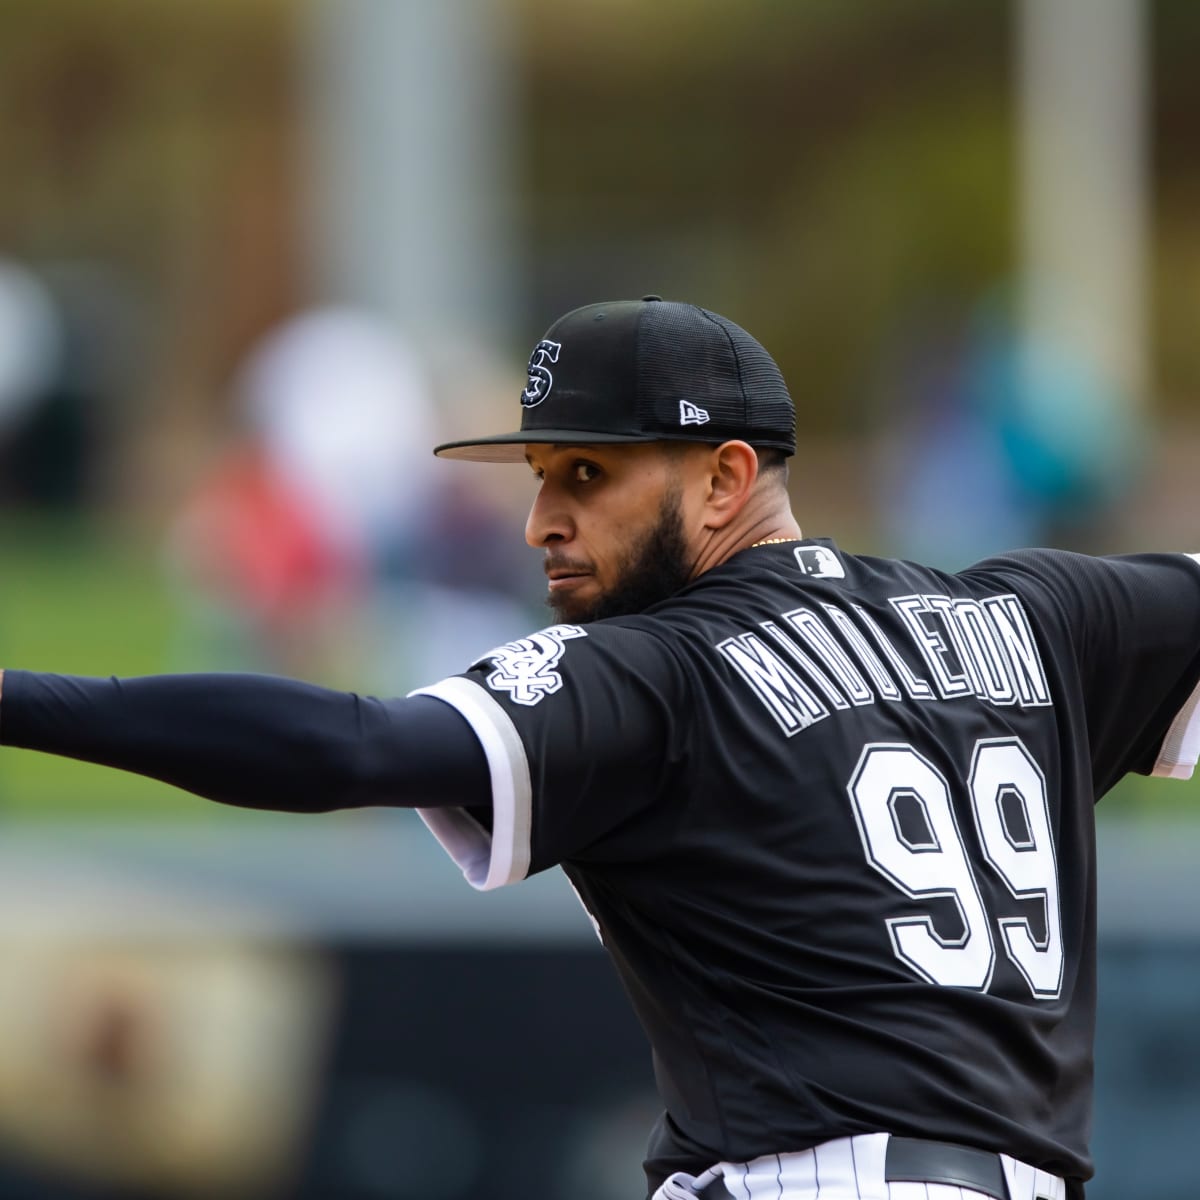 What to know about the White Sox August drama